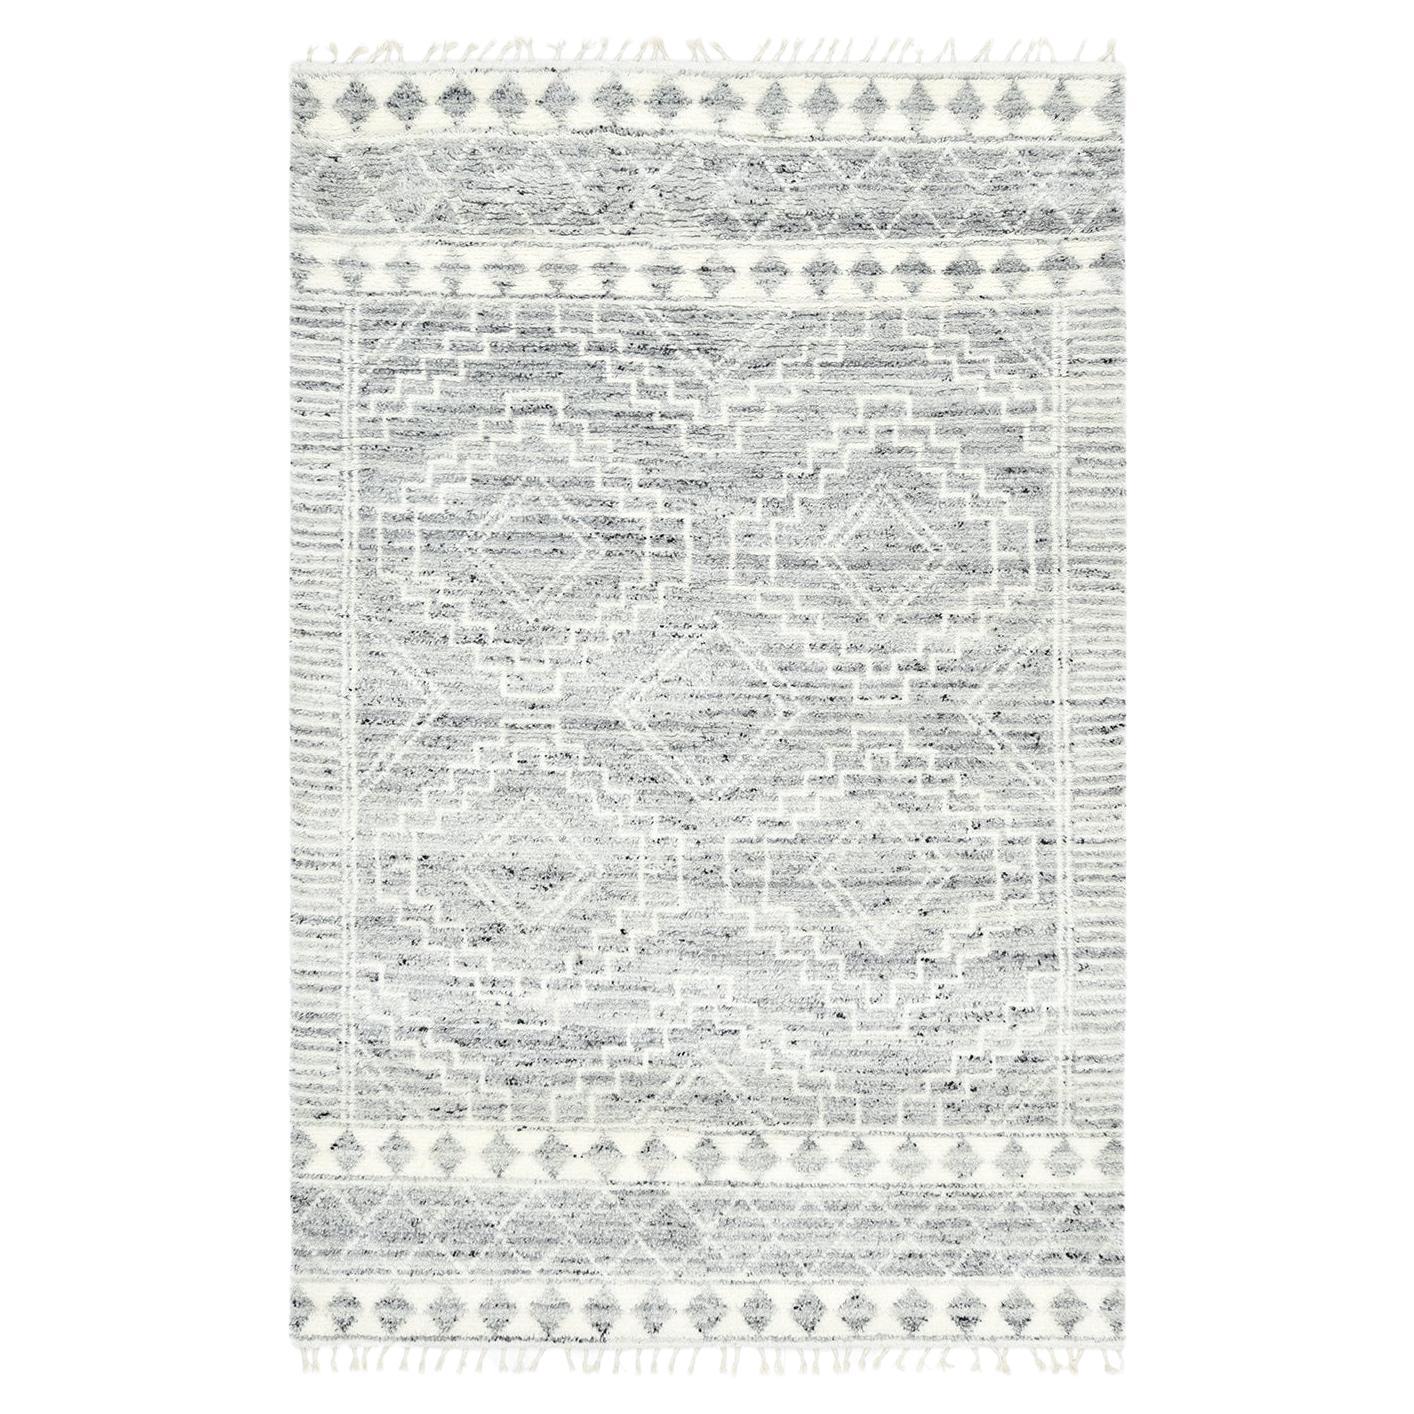 Solo Rugs Shaggy Moroccan Hand-Knotted Light Gray Area Rug